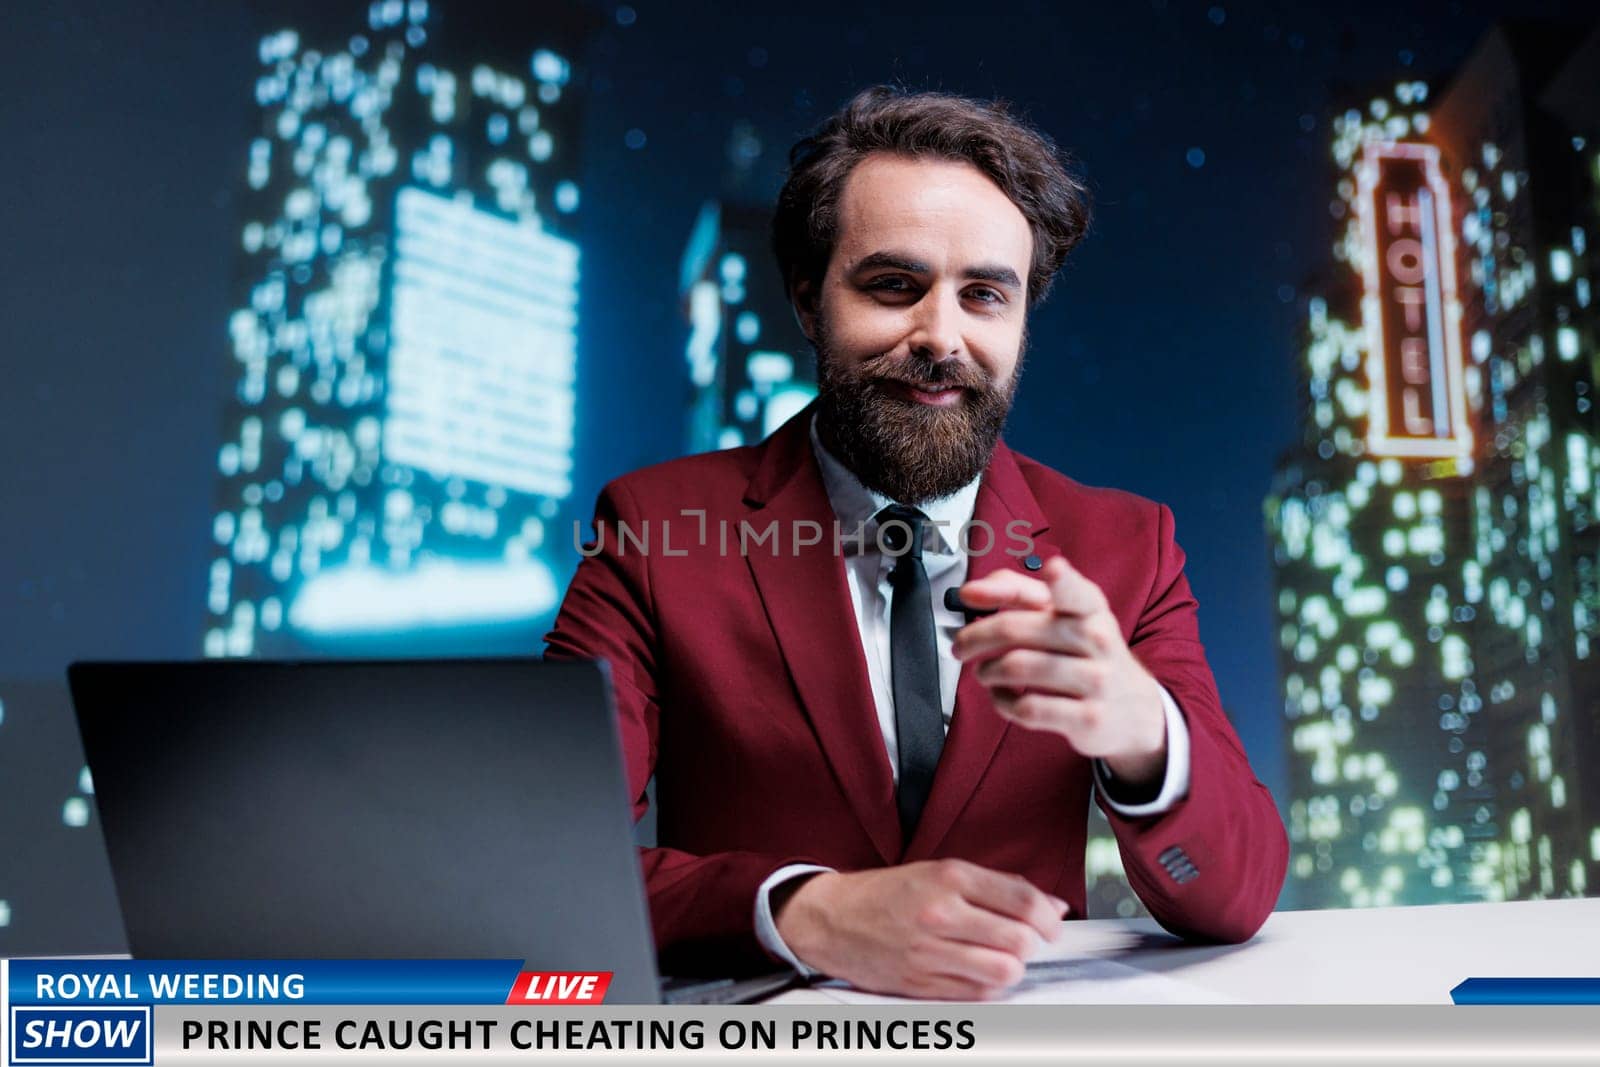 Night show host talks about royal conflict involving adultery, famous member of monarchy caught cheating. Media newscaster revealing information about prince and princess before wedding.